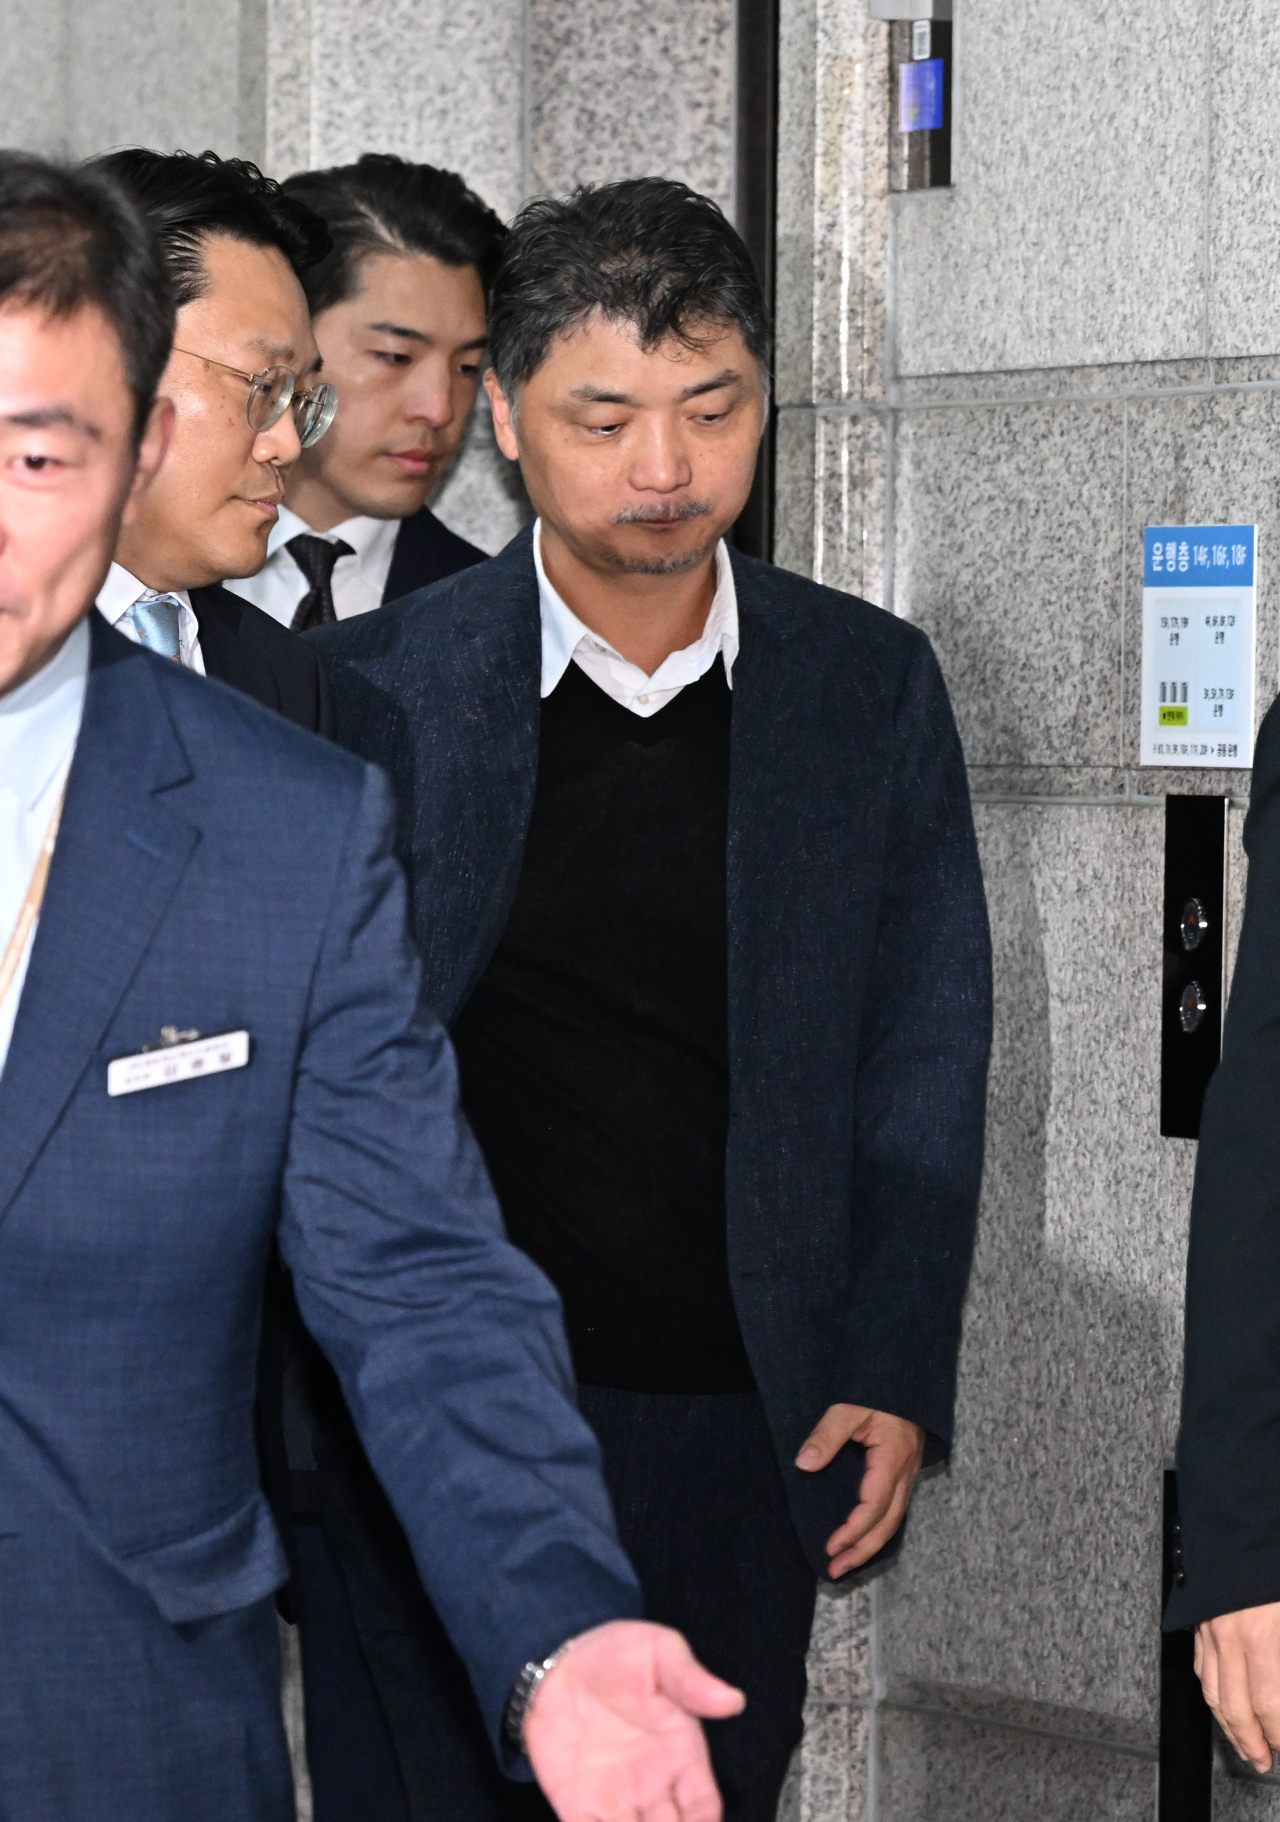 Kakao founder Kim Beom-soo enters the Financial Supervisory Service building in Seoul on Monday for questioning by the financial watchdog's special judicial police. (Lim Se-jun/The Korea Herald)